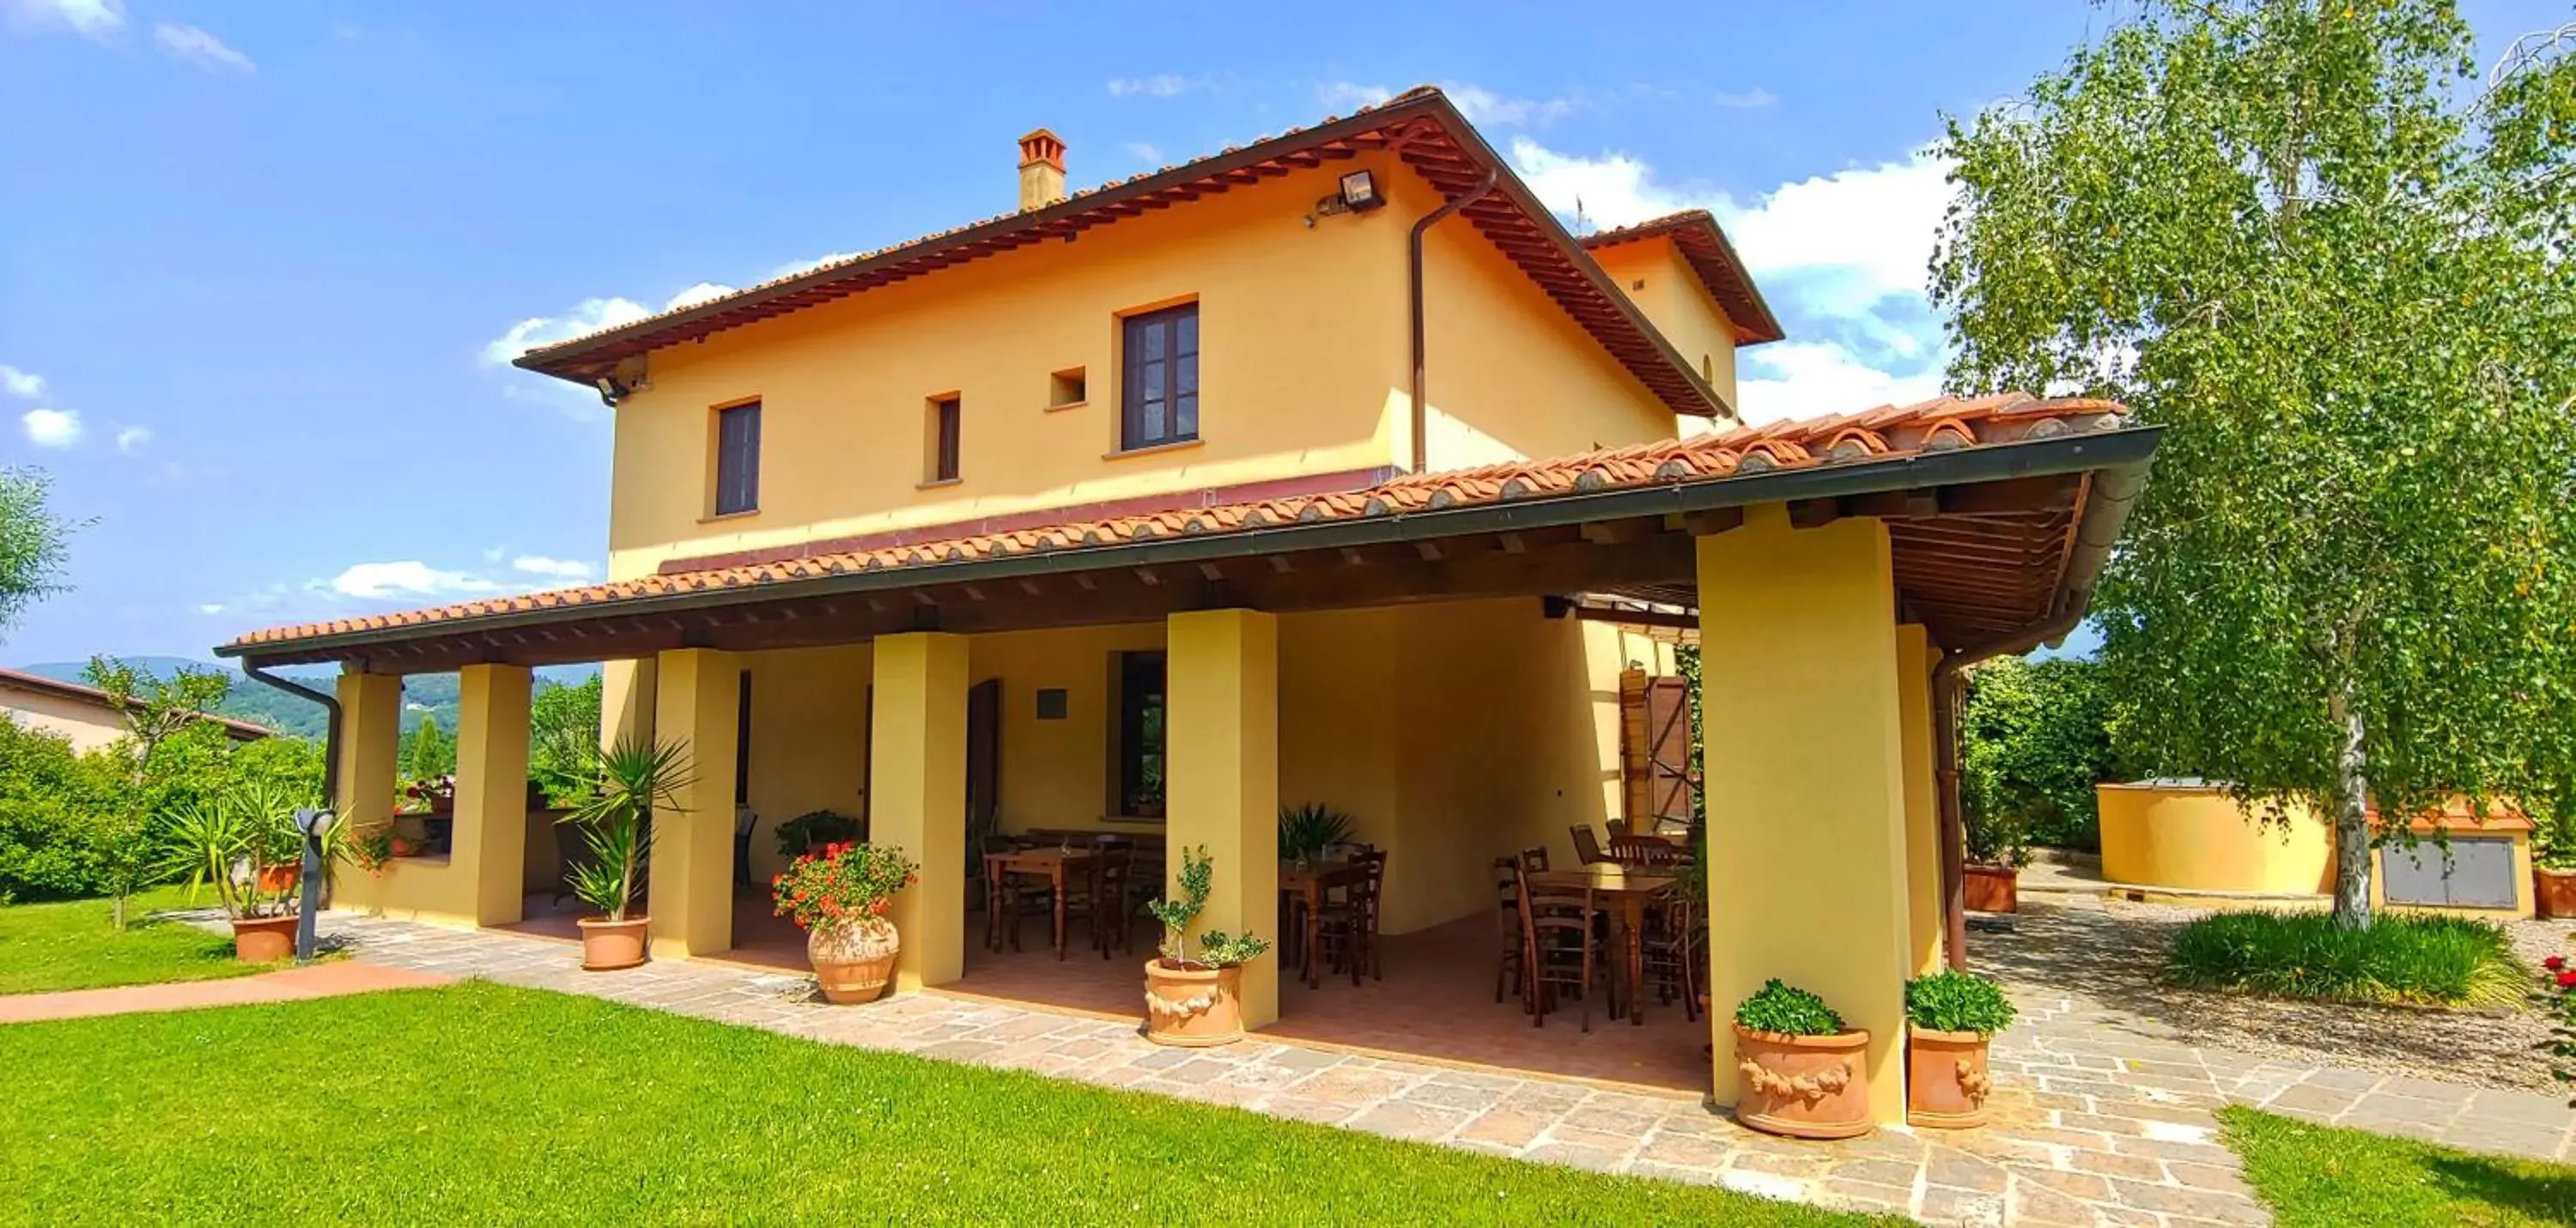 Patio, Property Building in Torrebianca Tuscany